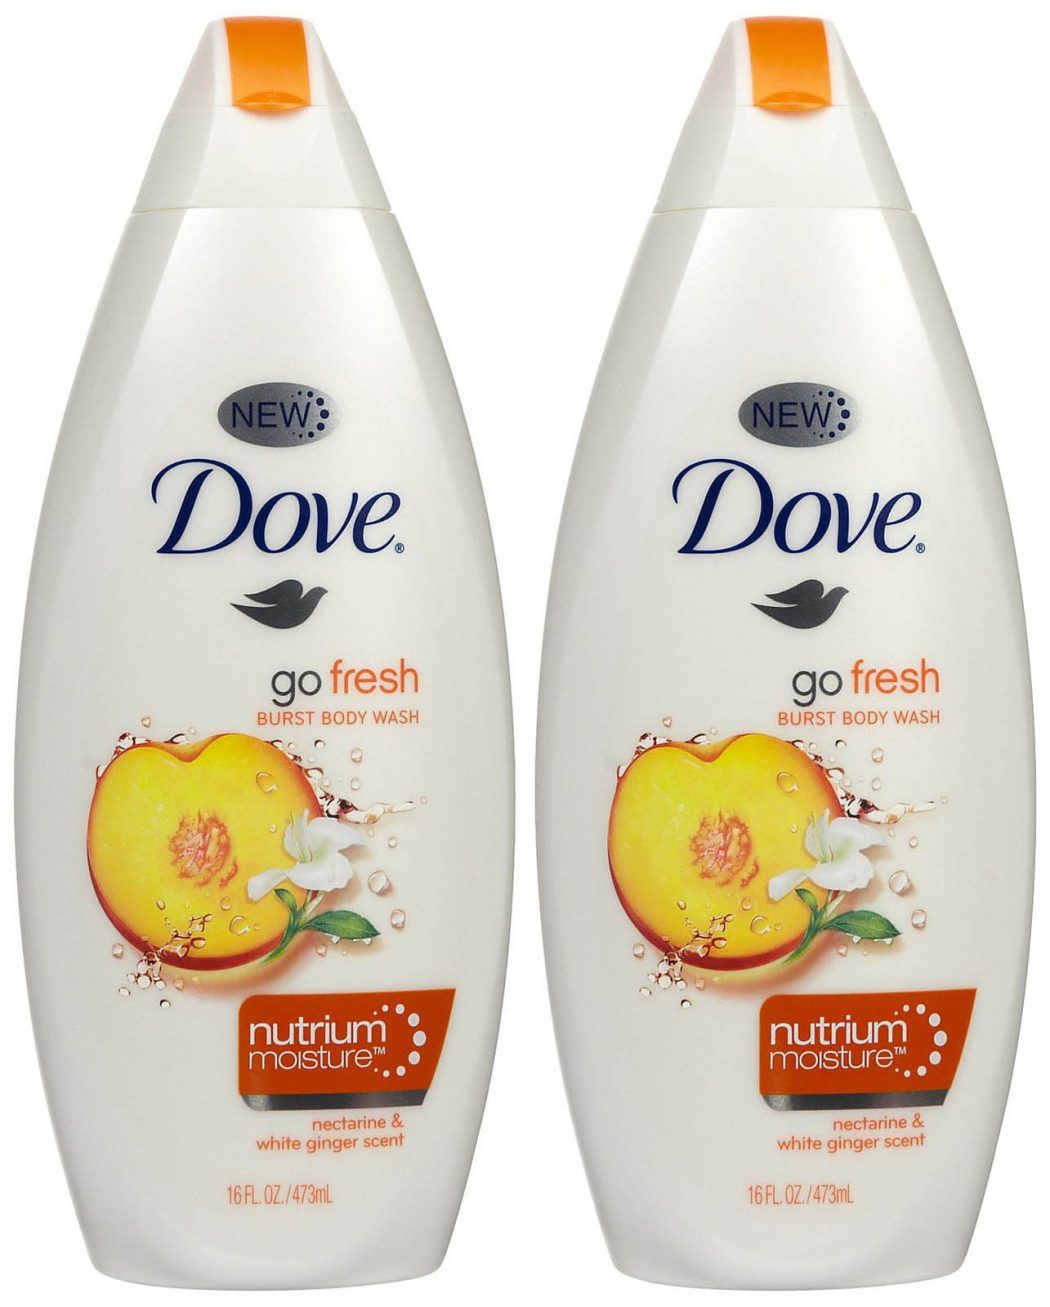 Dove Body Wash5 6 Best-Selling Women's Beauty Products - 11